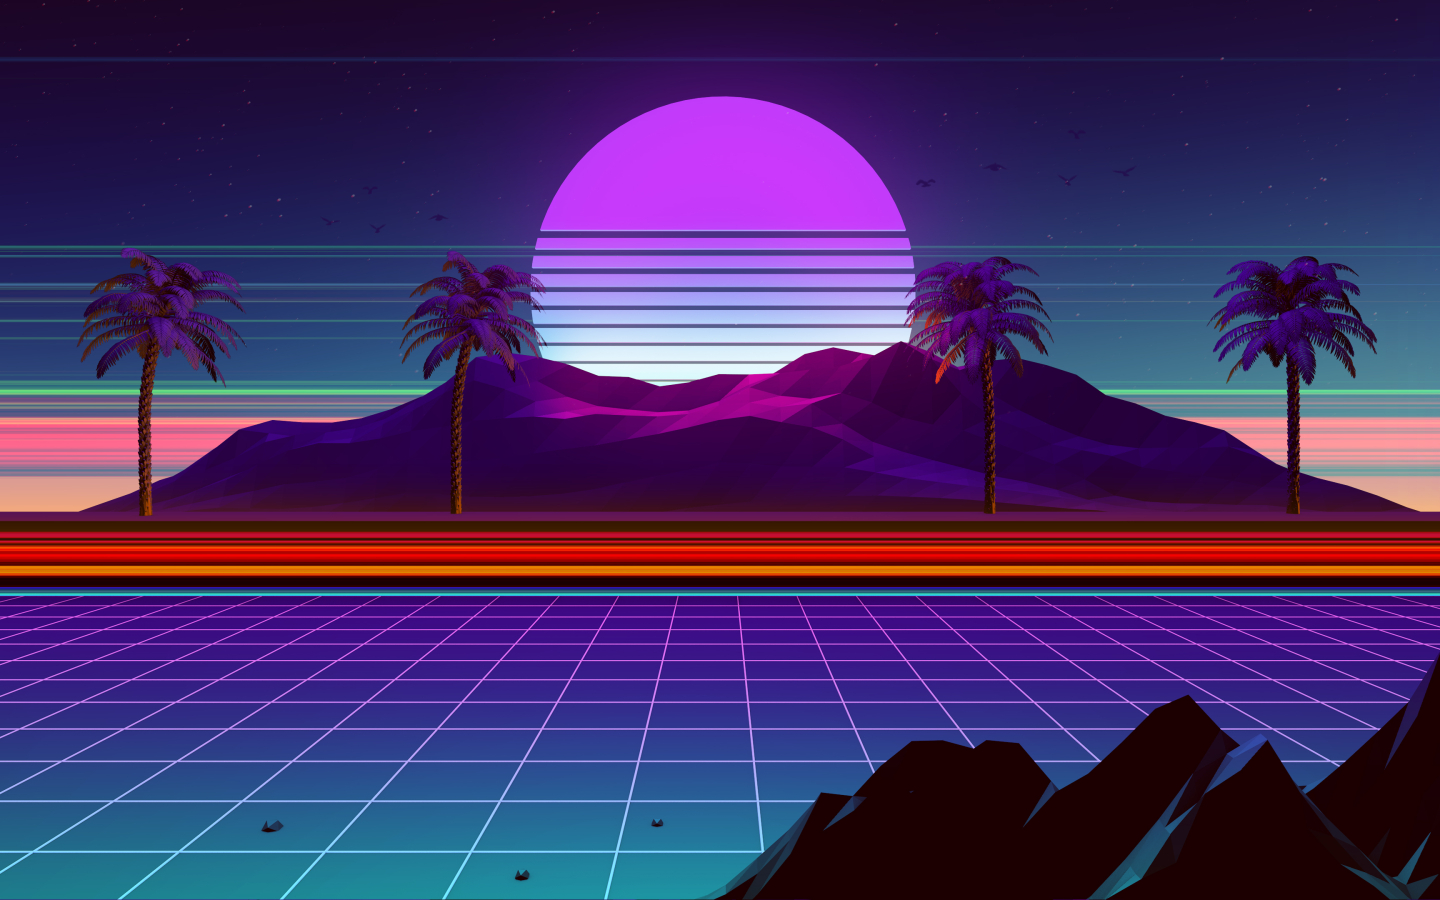 1440x900 Synthwave And Retrowave 1440x900 Wallpaper Hd Artist 4k Wallpapers Images Photos And Background